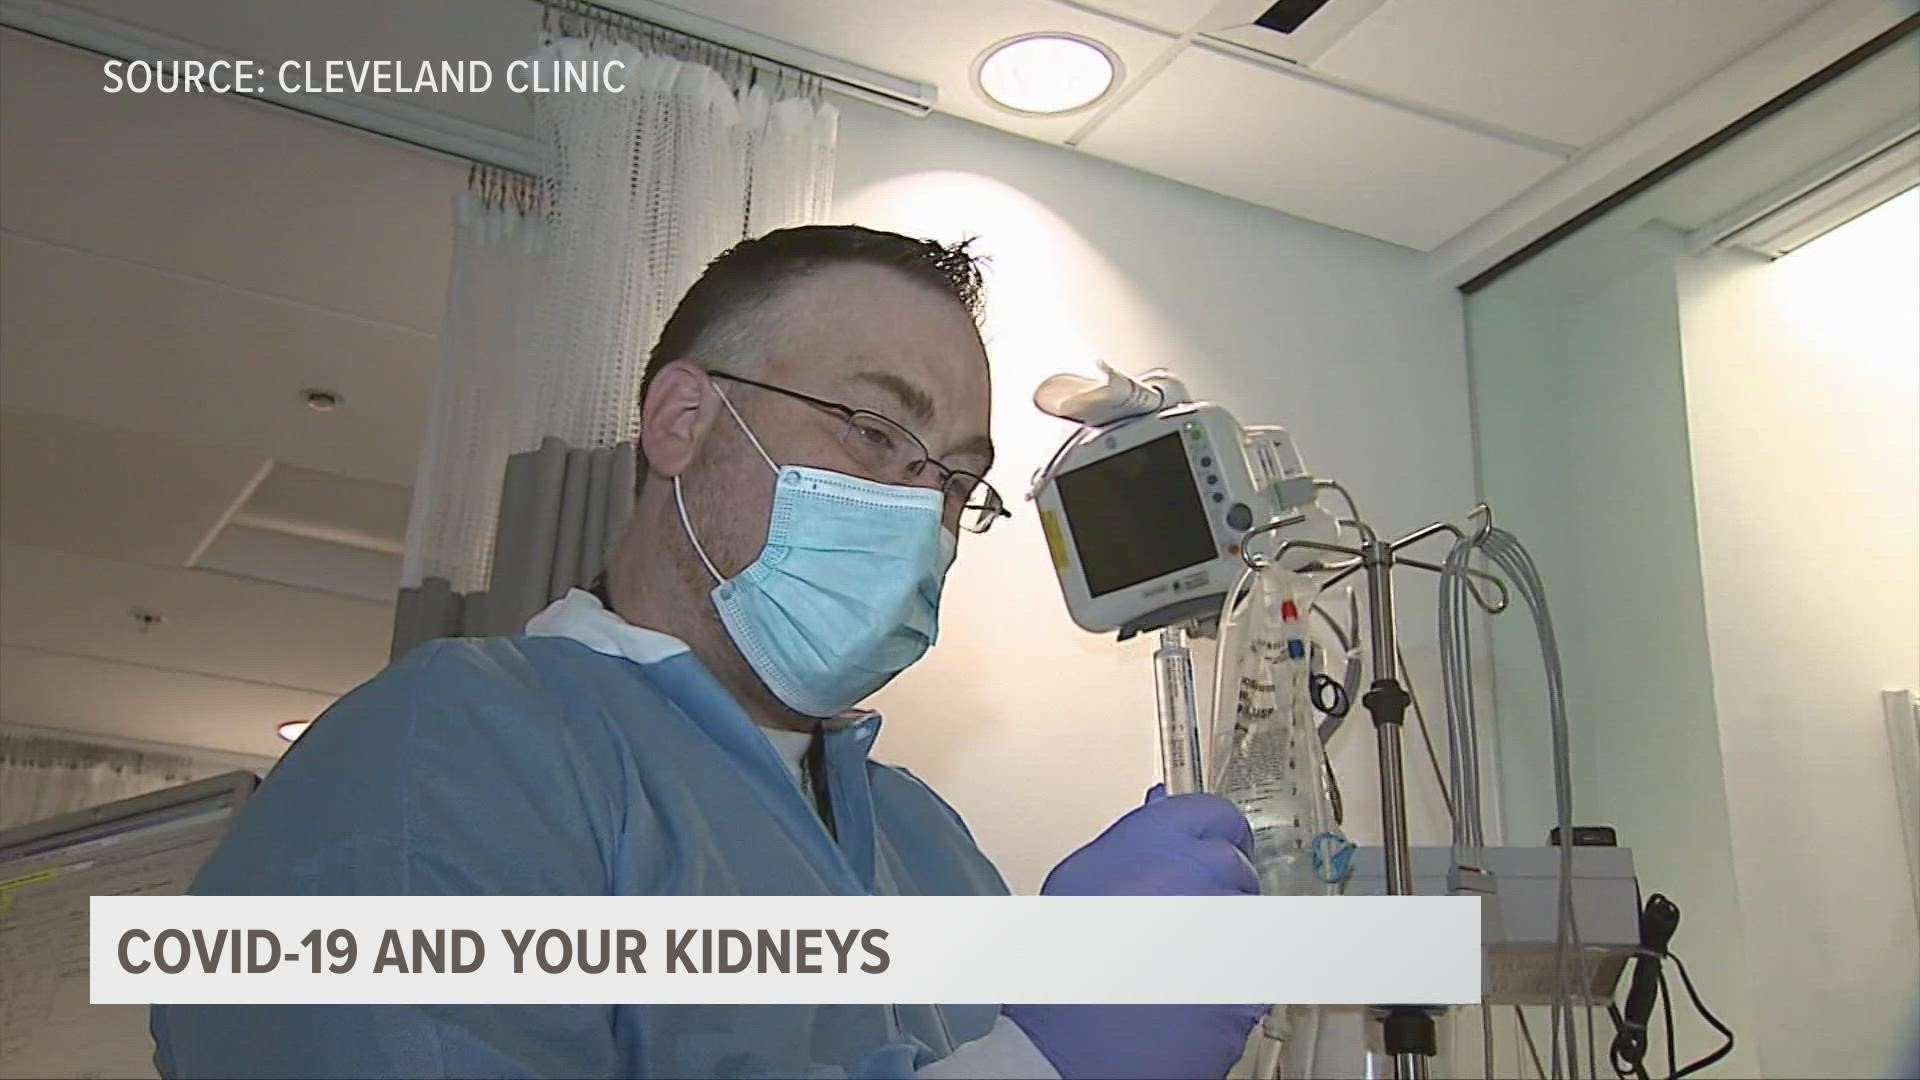 Since your kidneys are responsible for filtering your blood, the virus can put them at risk.